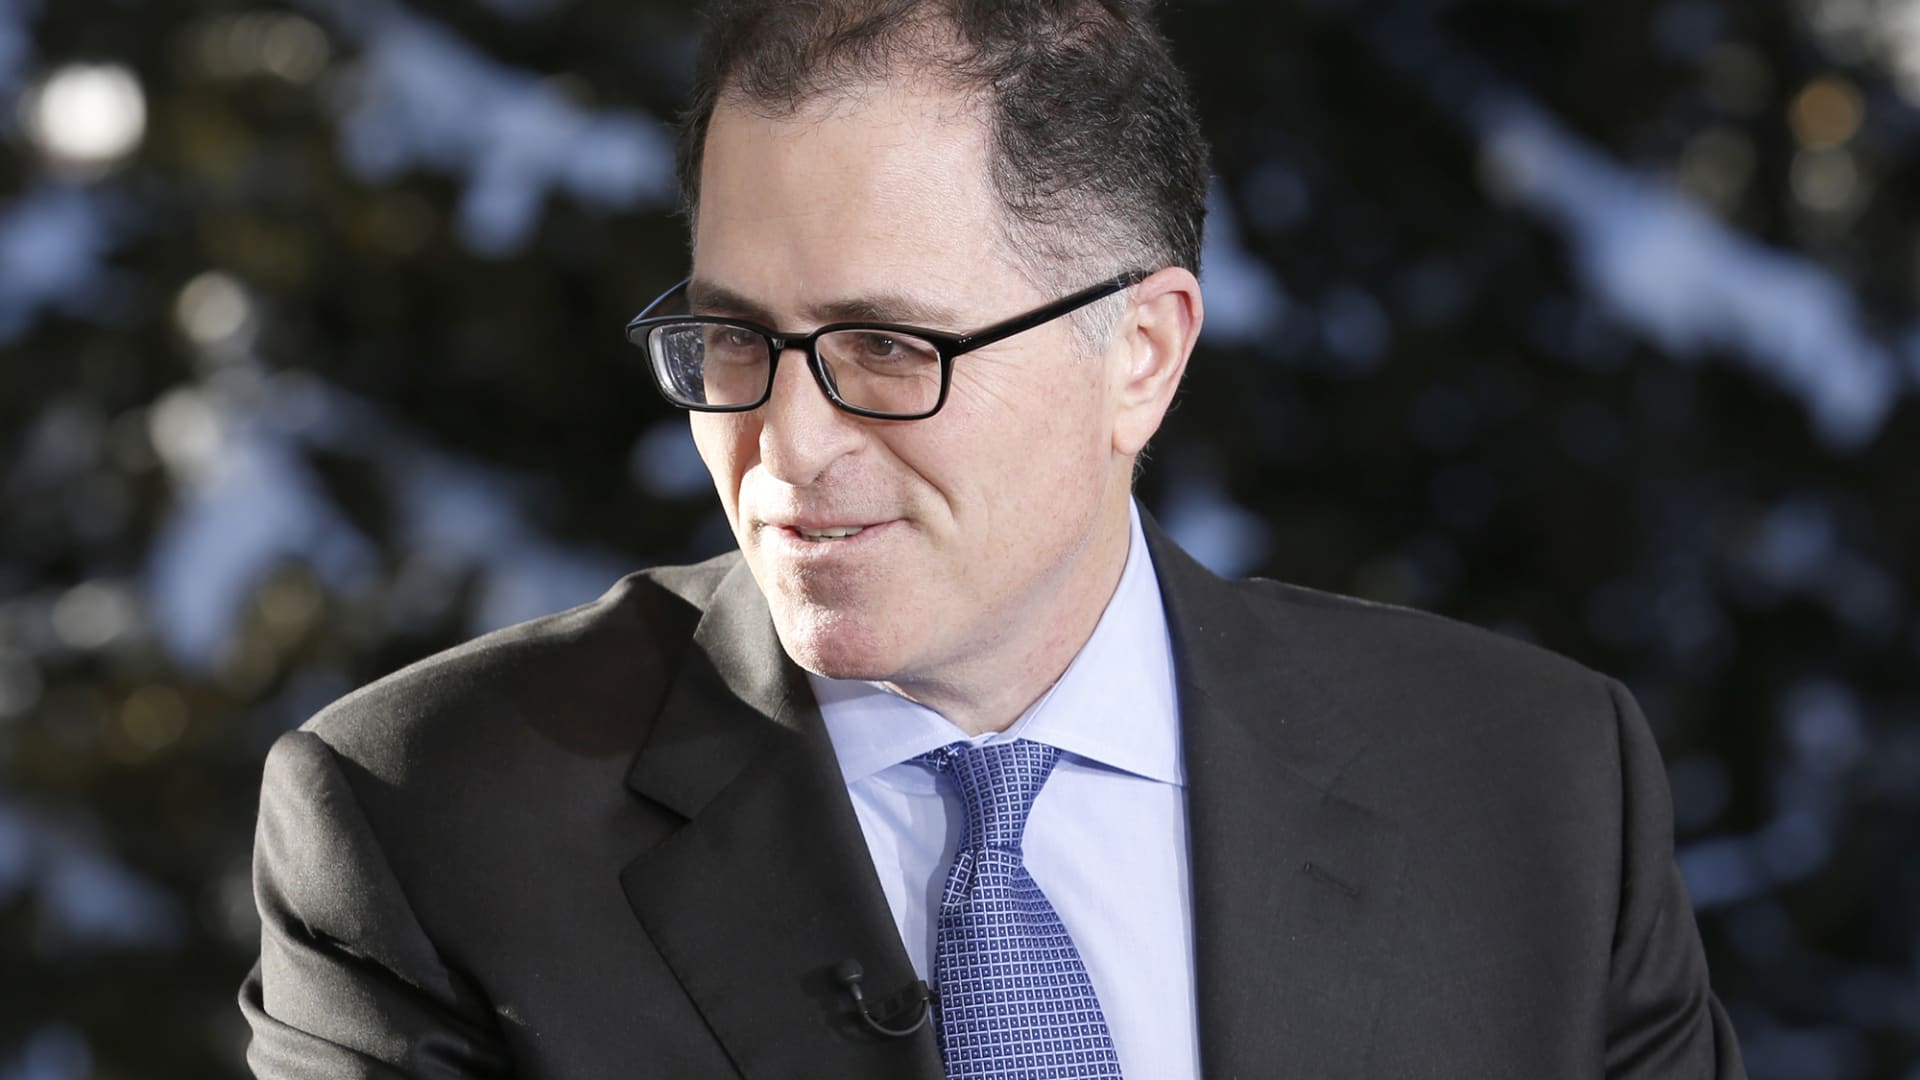 Dell has best day on stock market since its relisting in 2018 after earnings sail past estimates